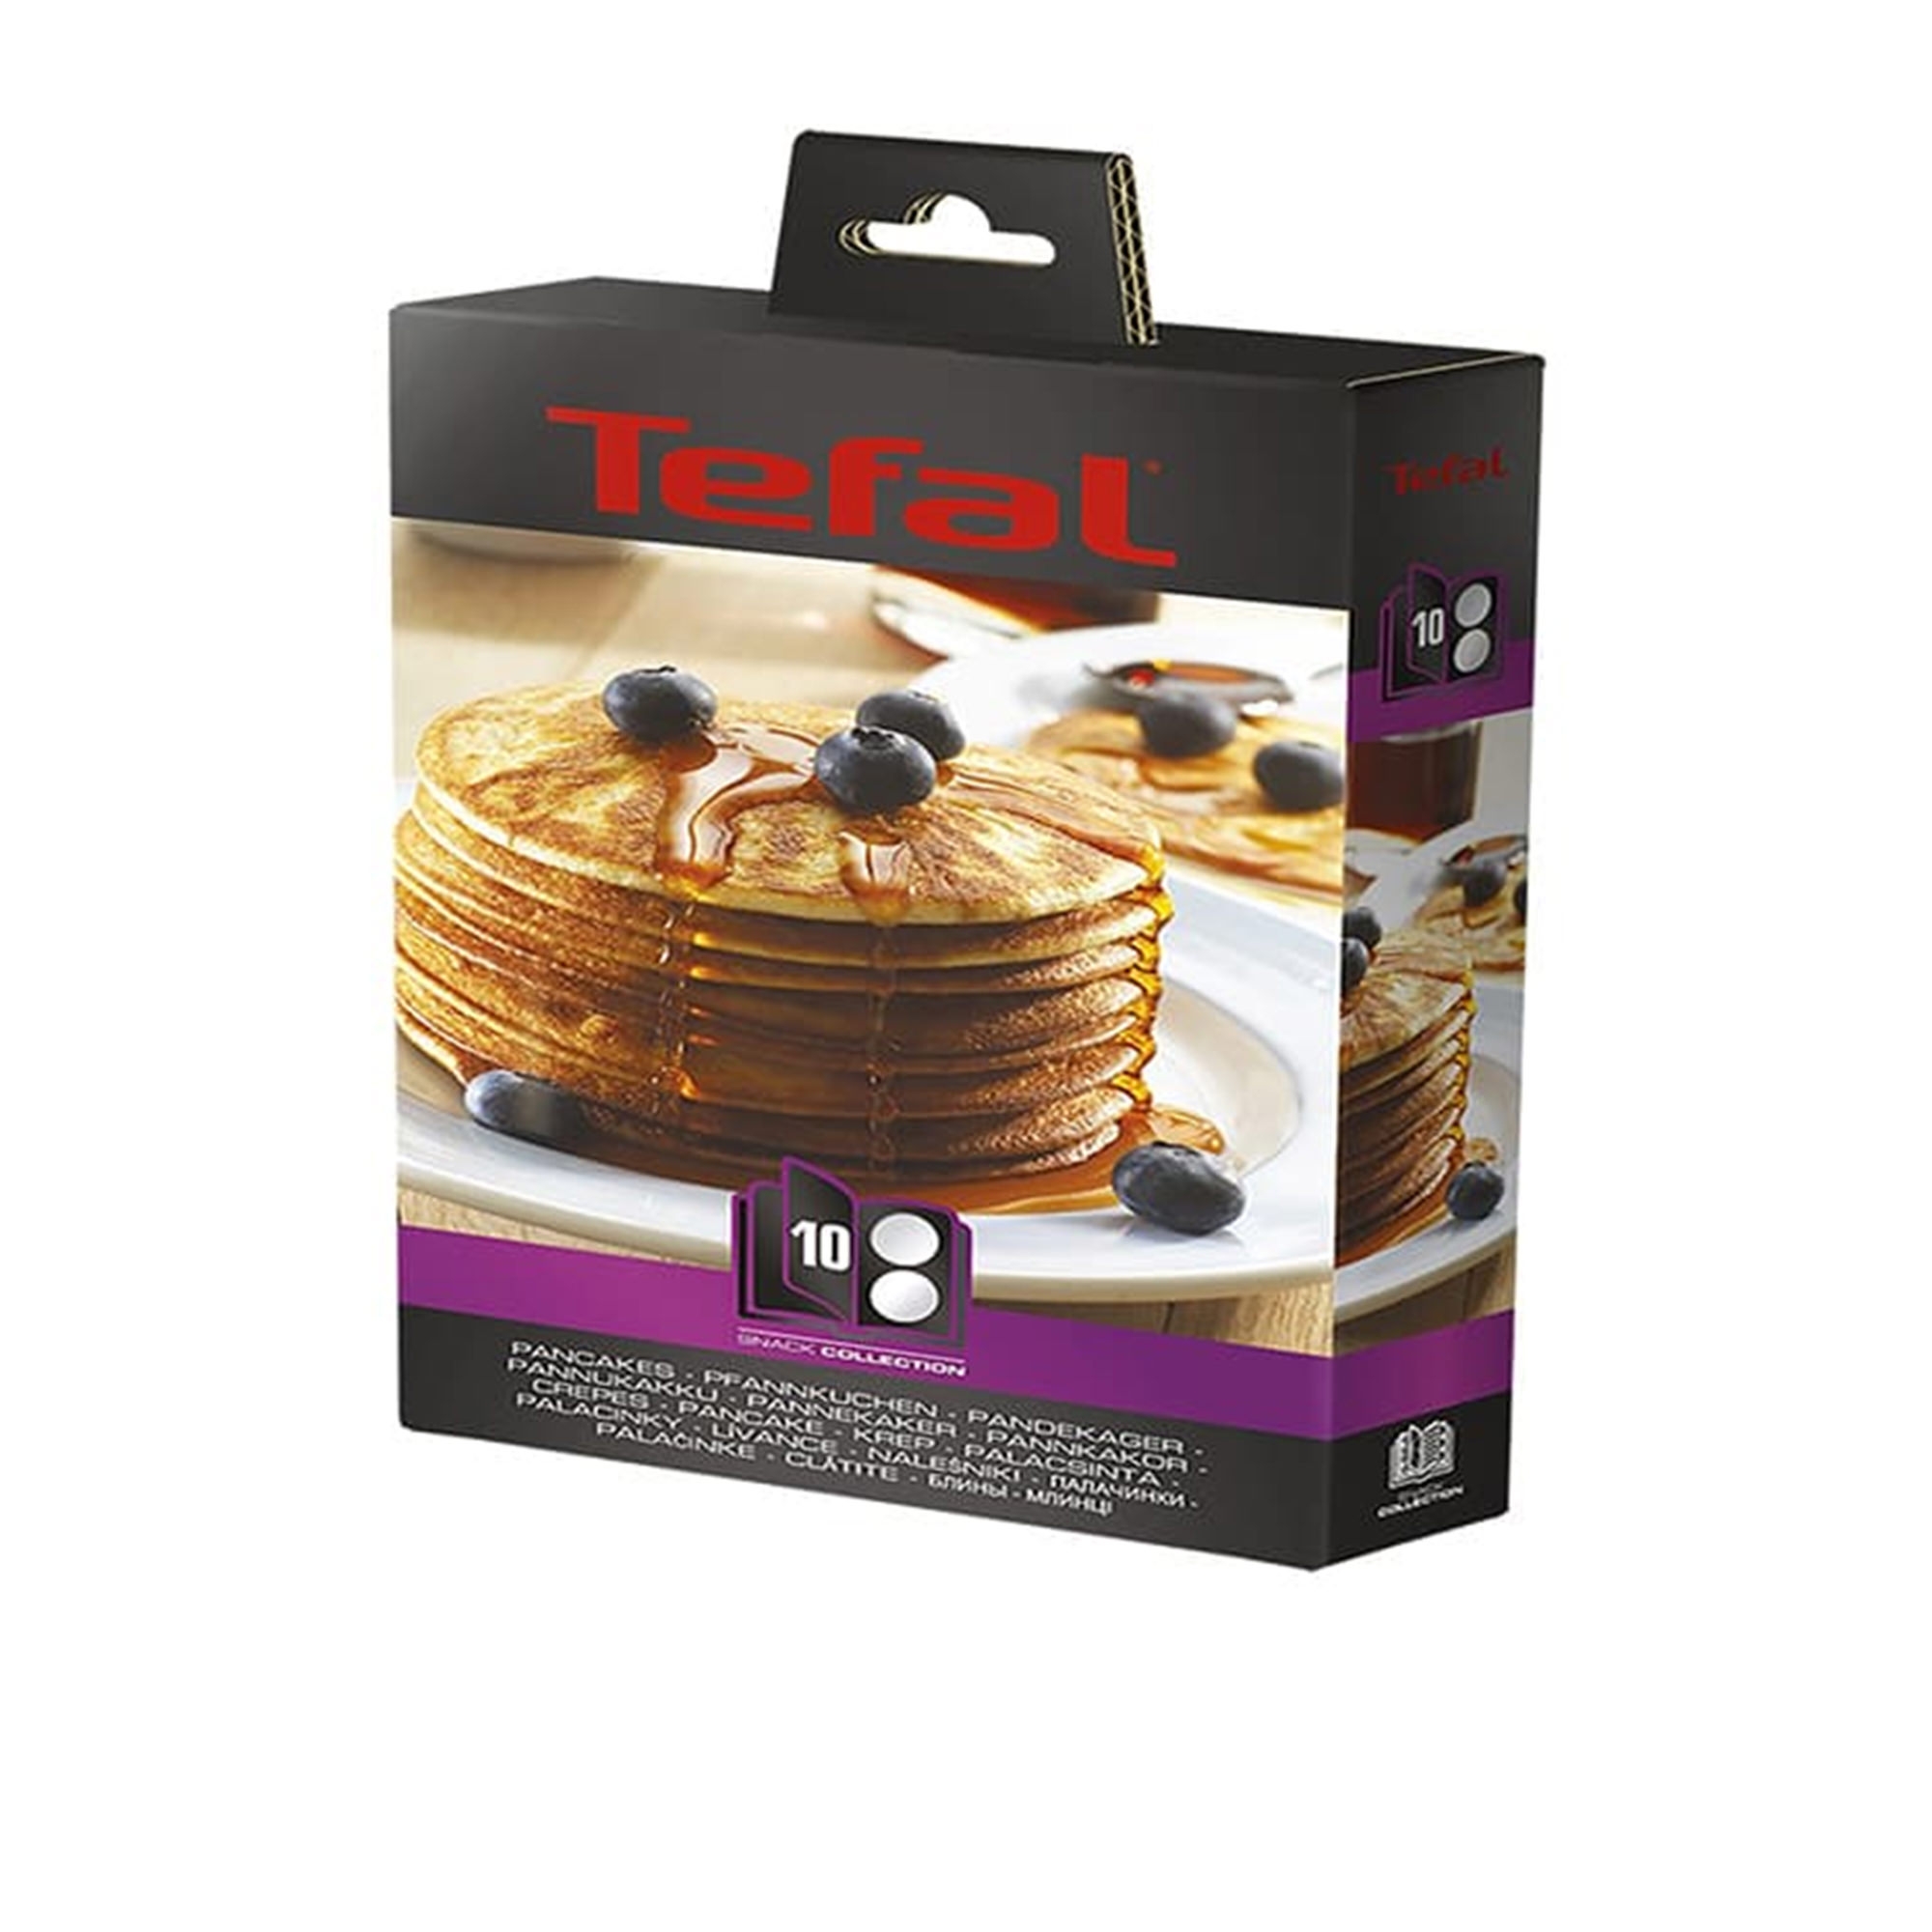 Tefal Snack Collection Accessory Plates Pancake Image 2